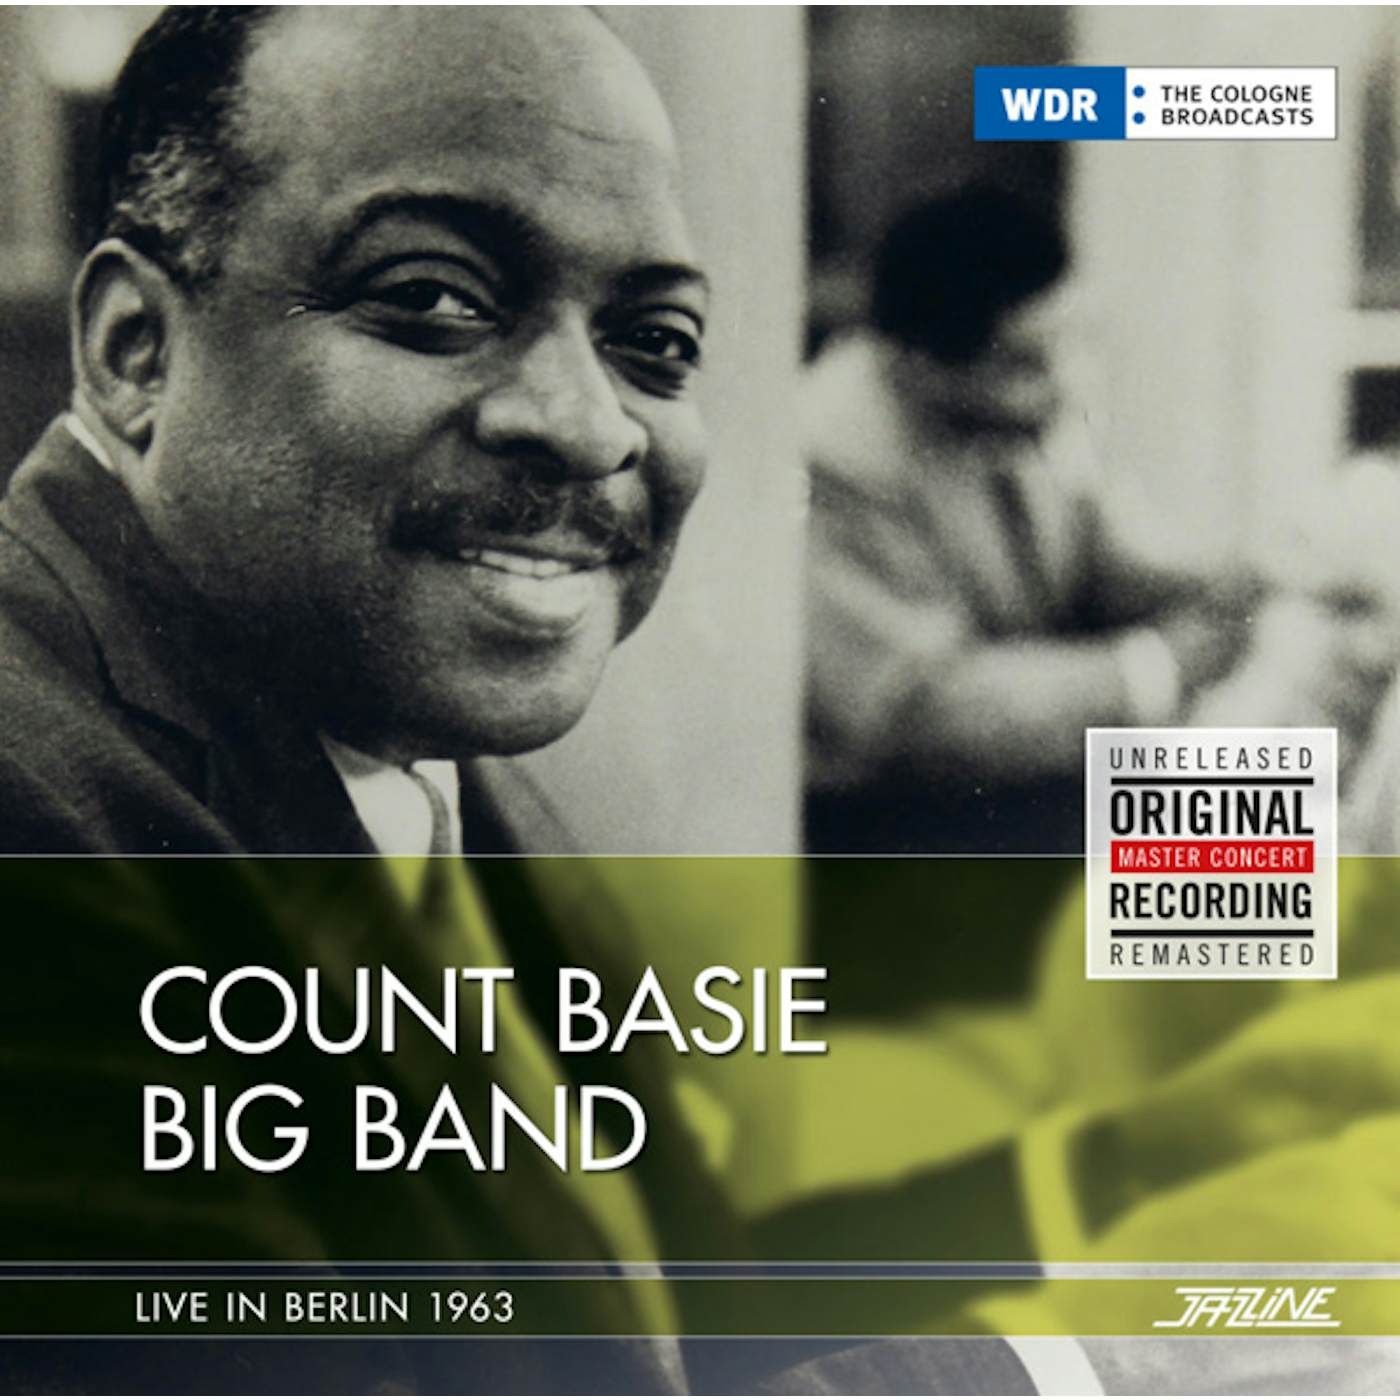 Count Basie Orchestra LIVE IN BERLIN 1963 CD